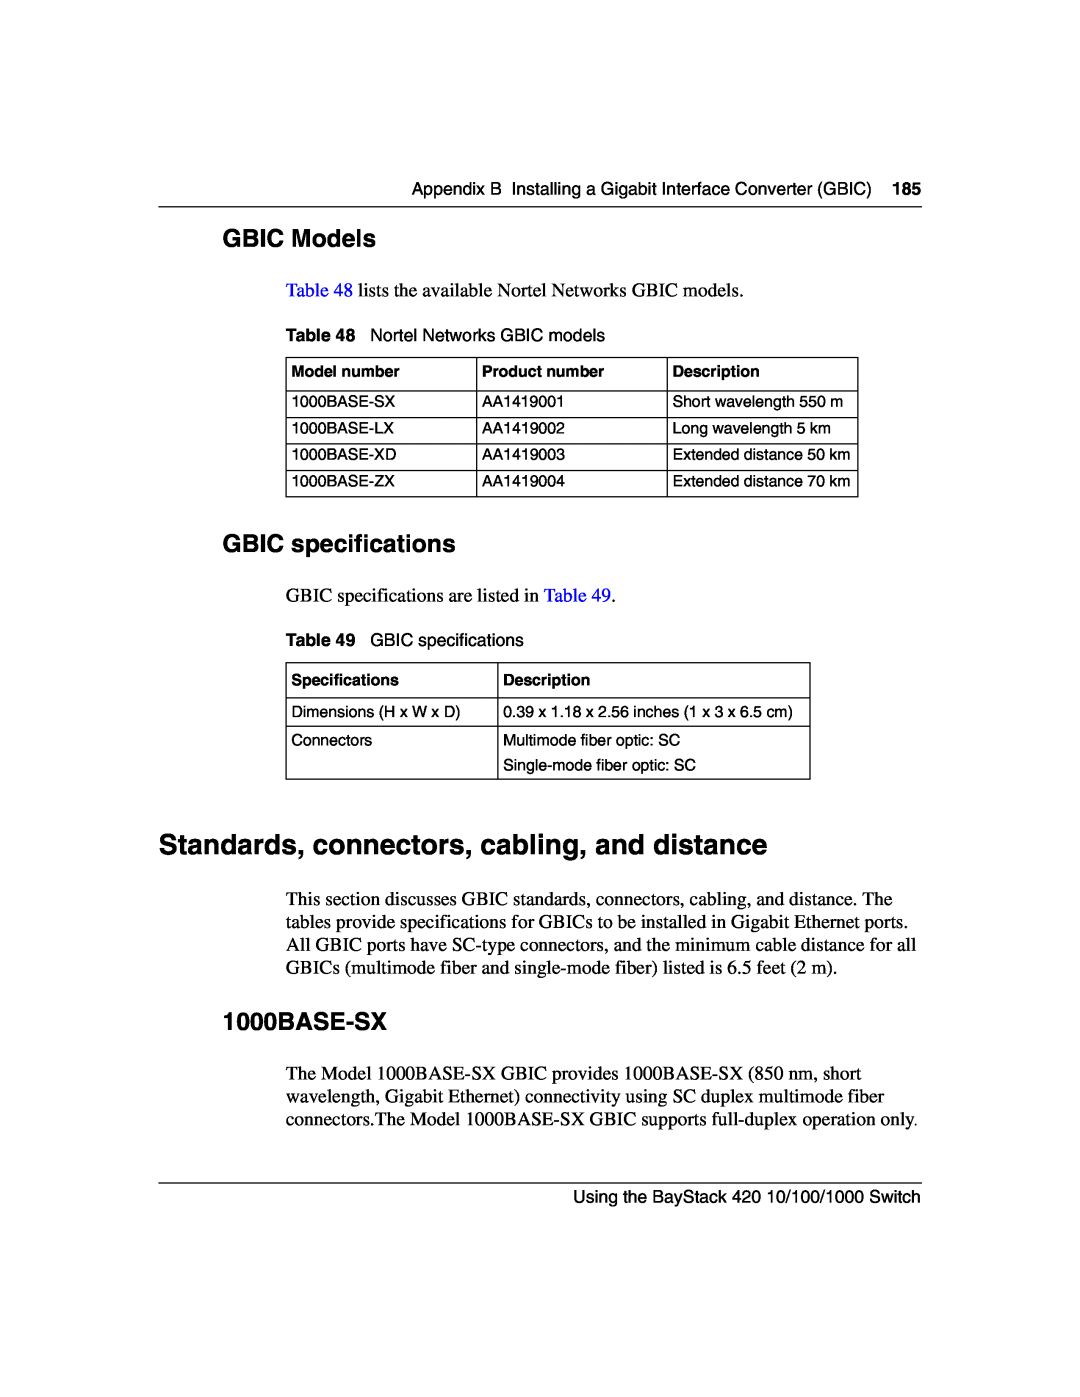 Nortel Networks 1000ASE-XD Standards, connectors, cabling, and distance, GBIC Models, GBIC specifications, 1000BASE-SX 